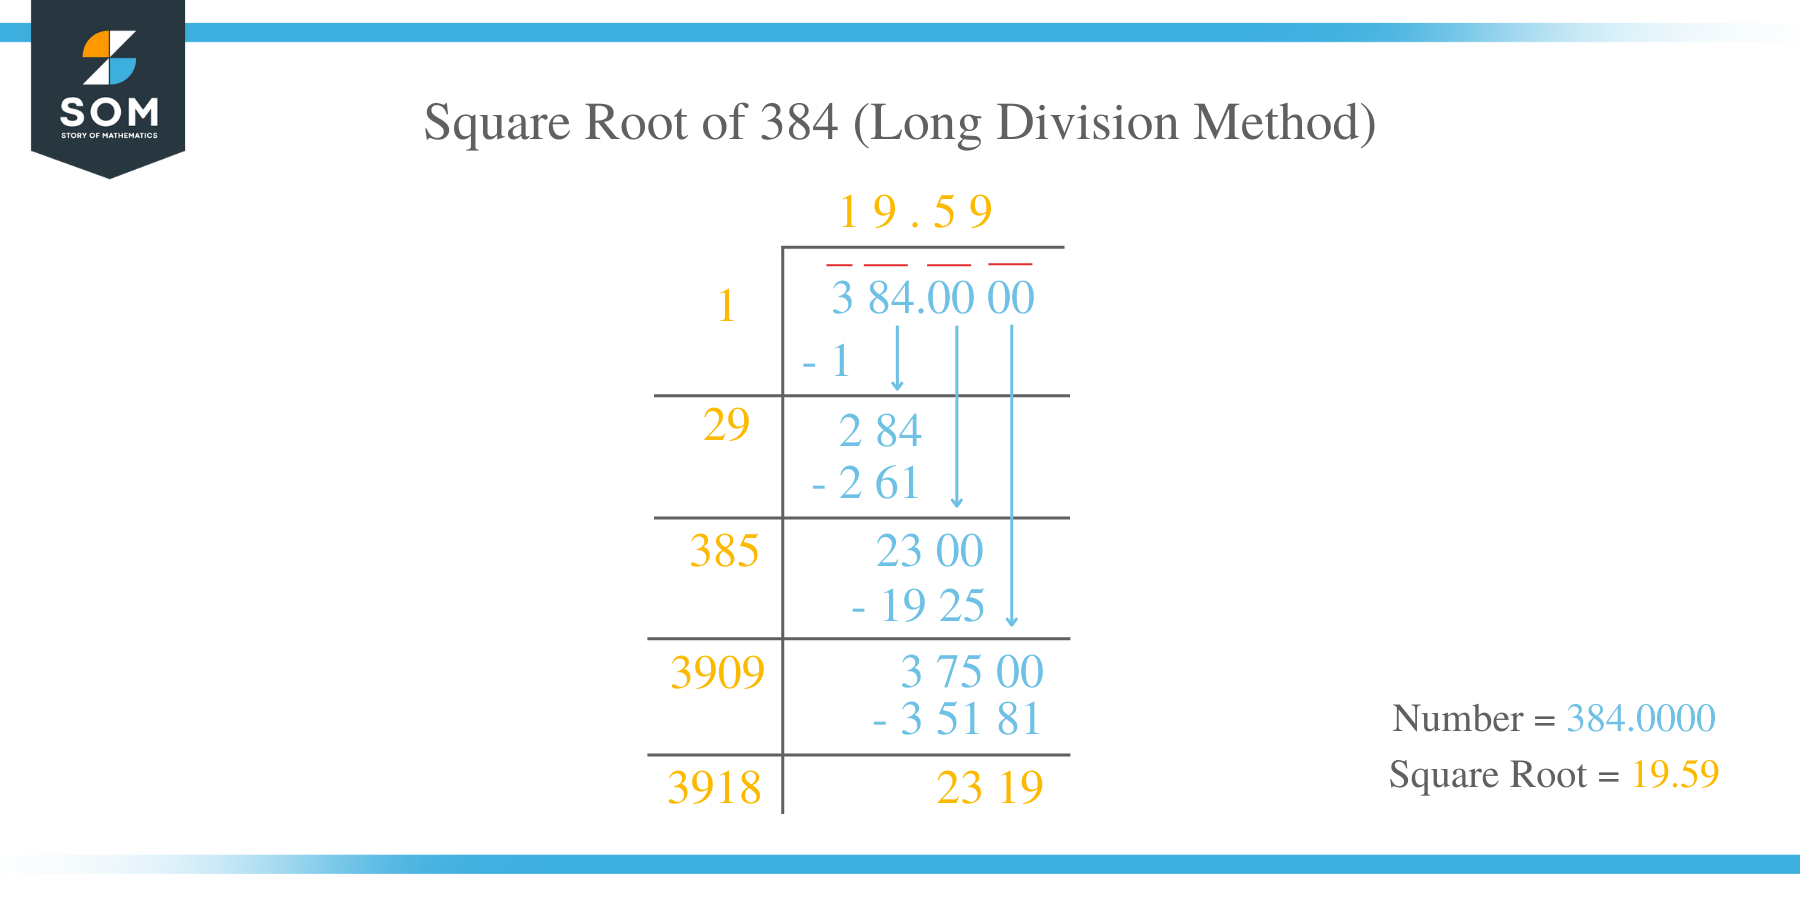 Square Root of 384 by Long Division Method